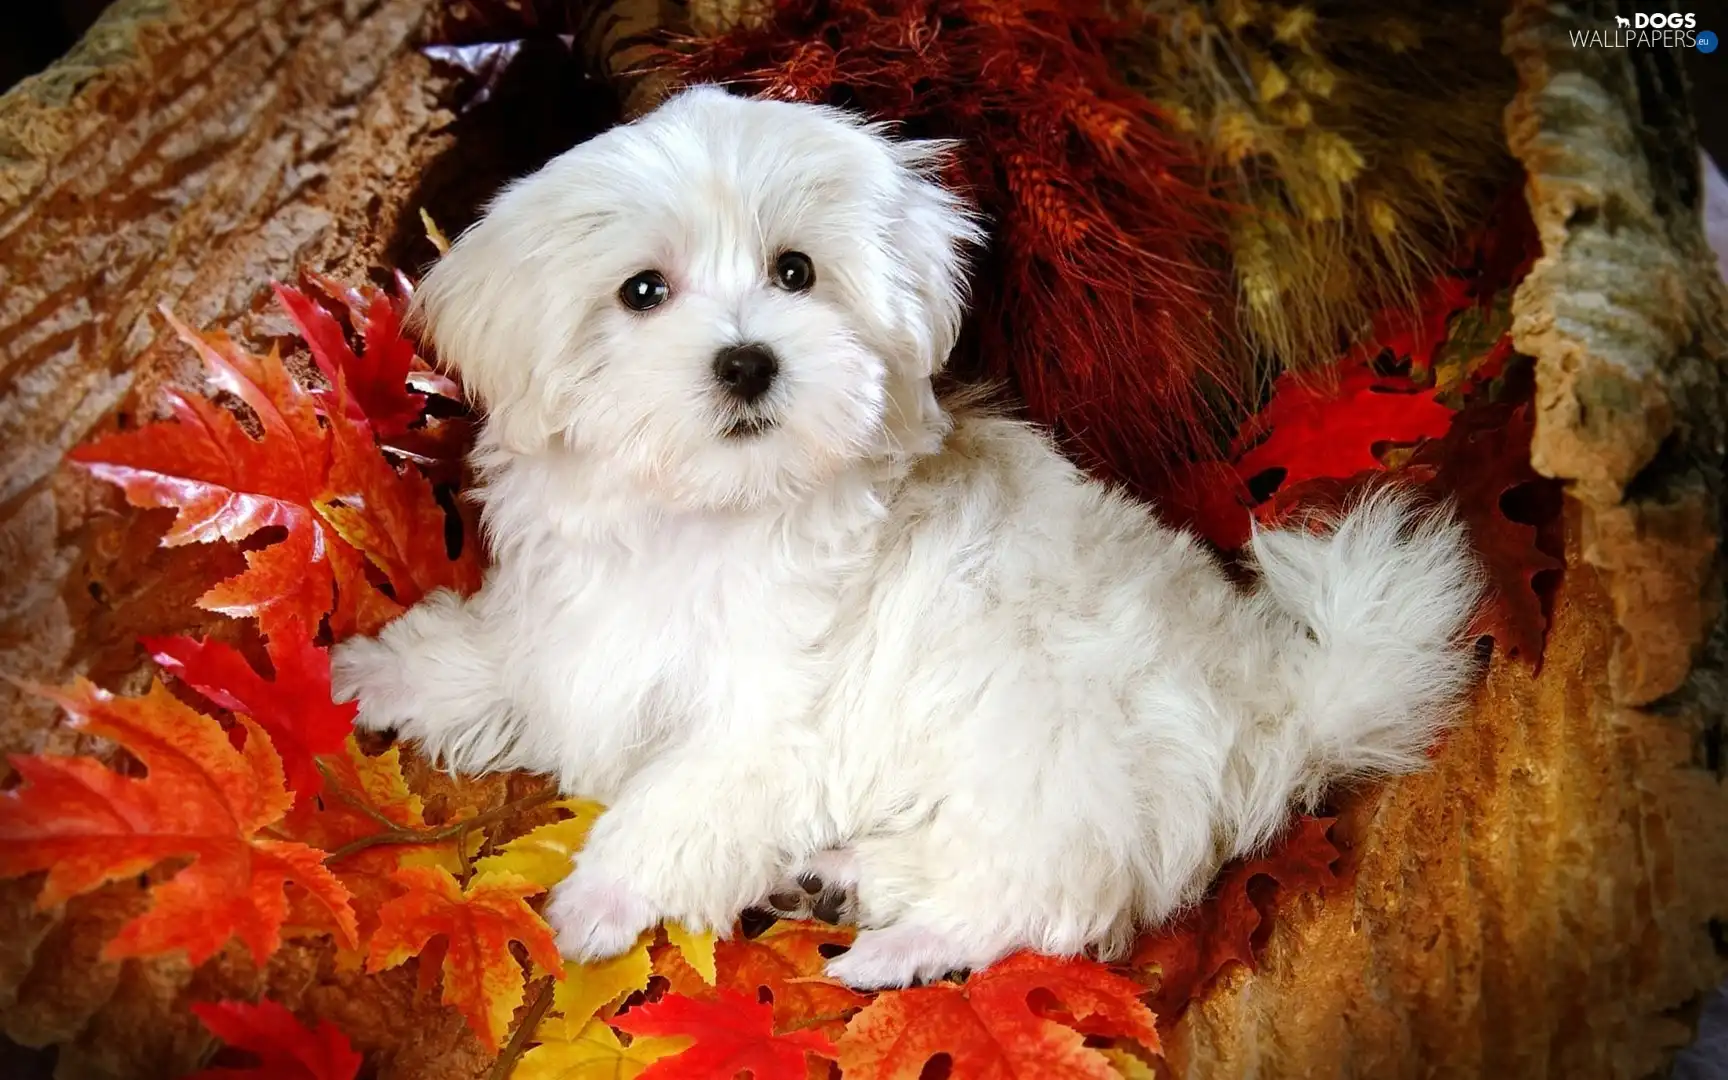 Leaf, Bichon frise - Dogs wallpapers: 1728x1080